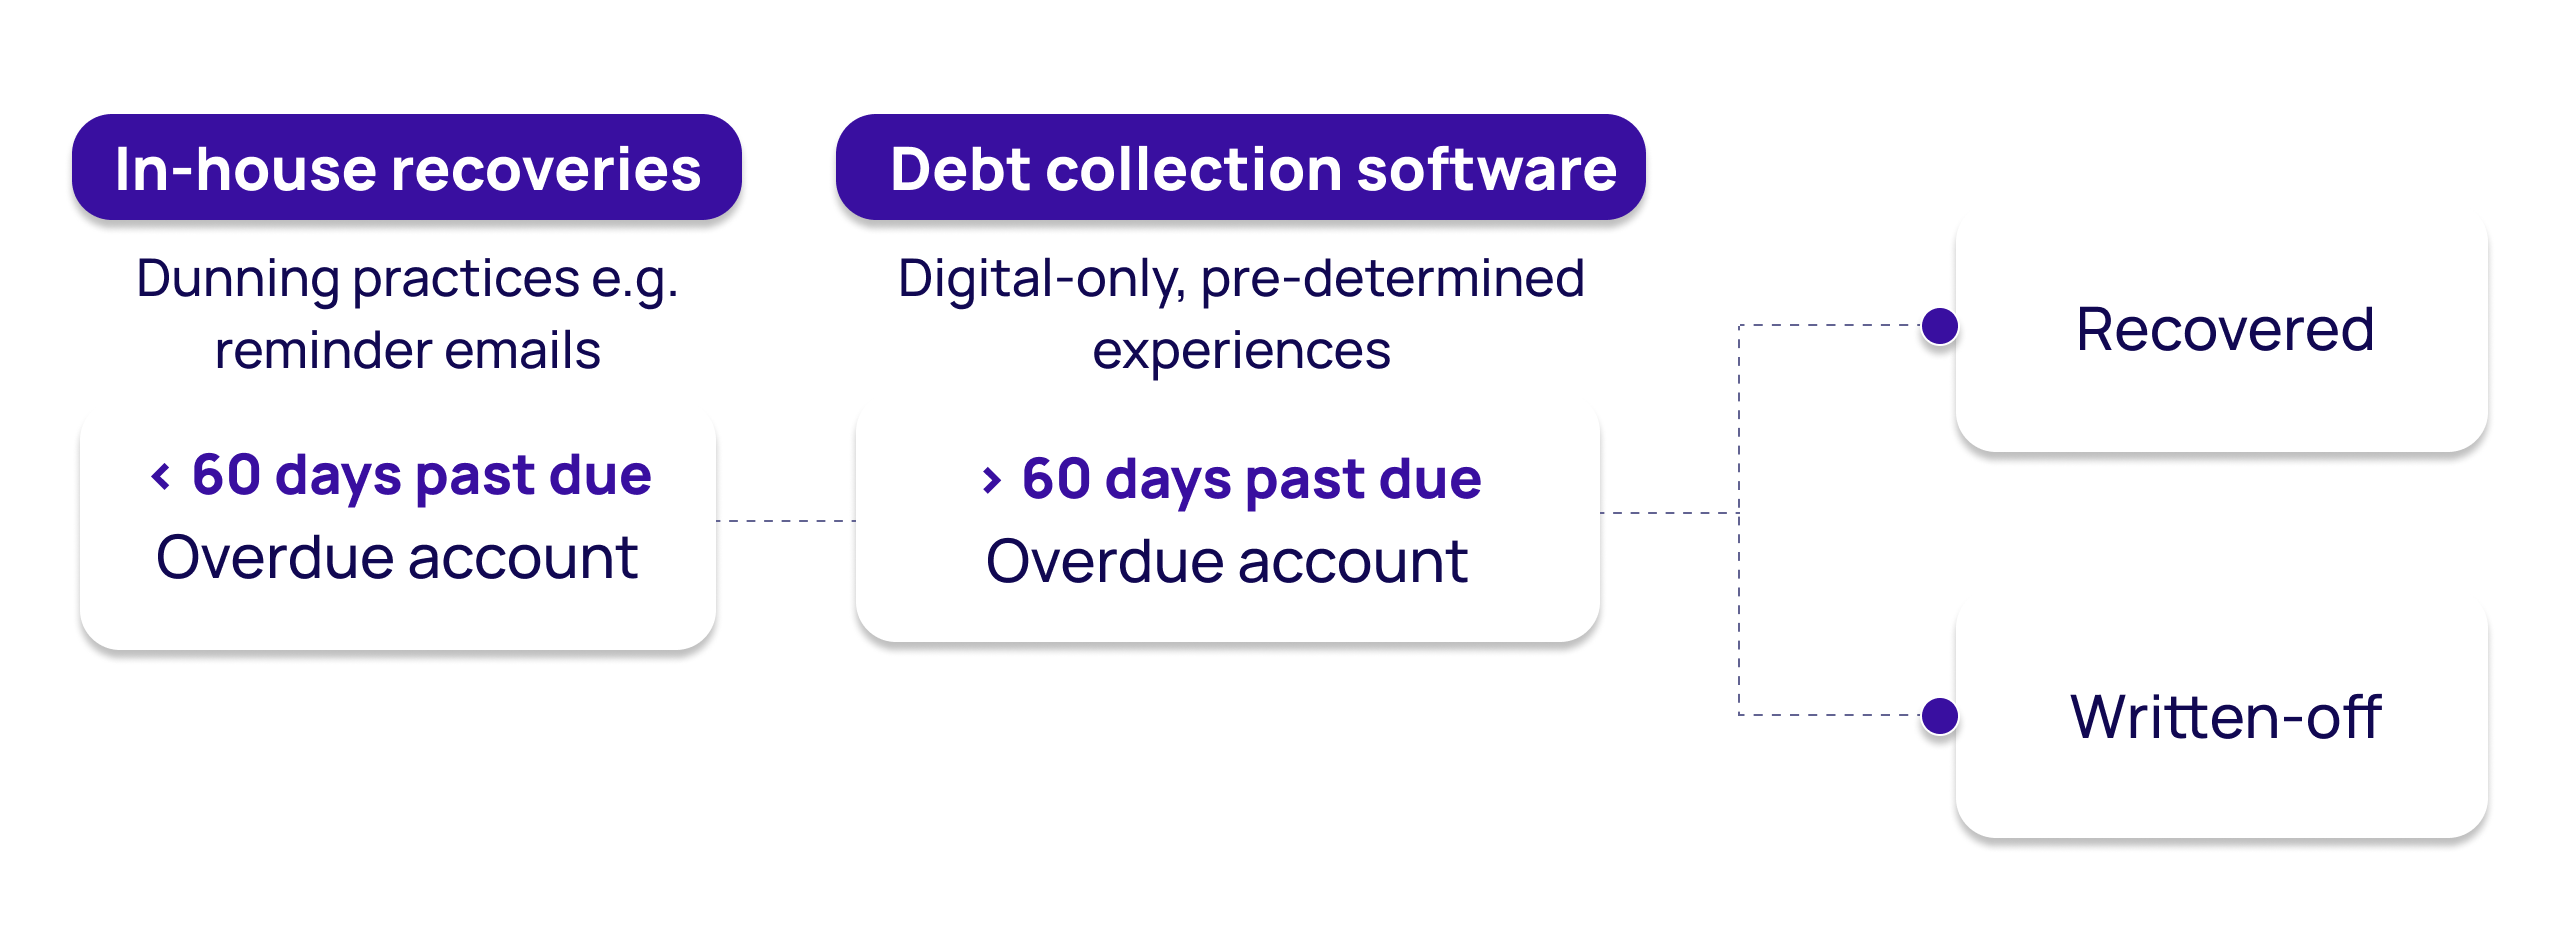 In-house recoveries and debt collection software